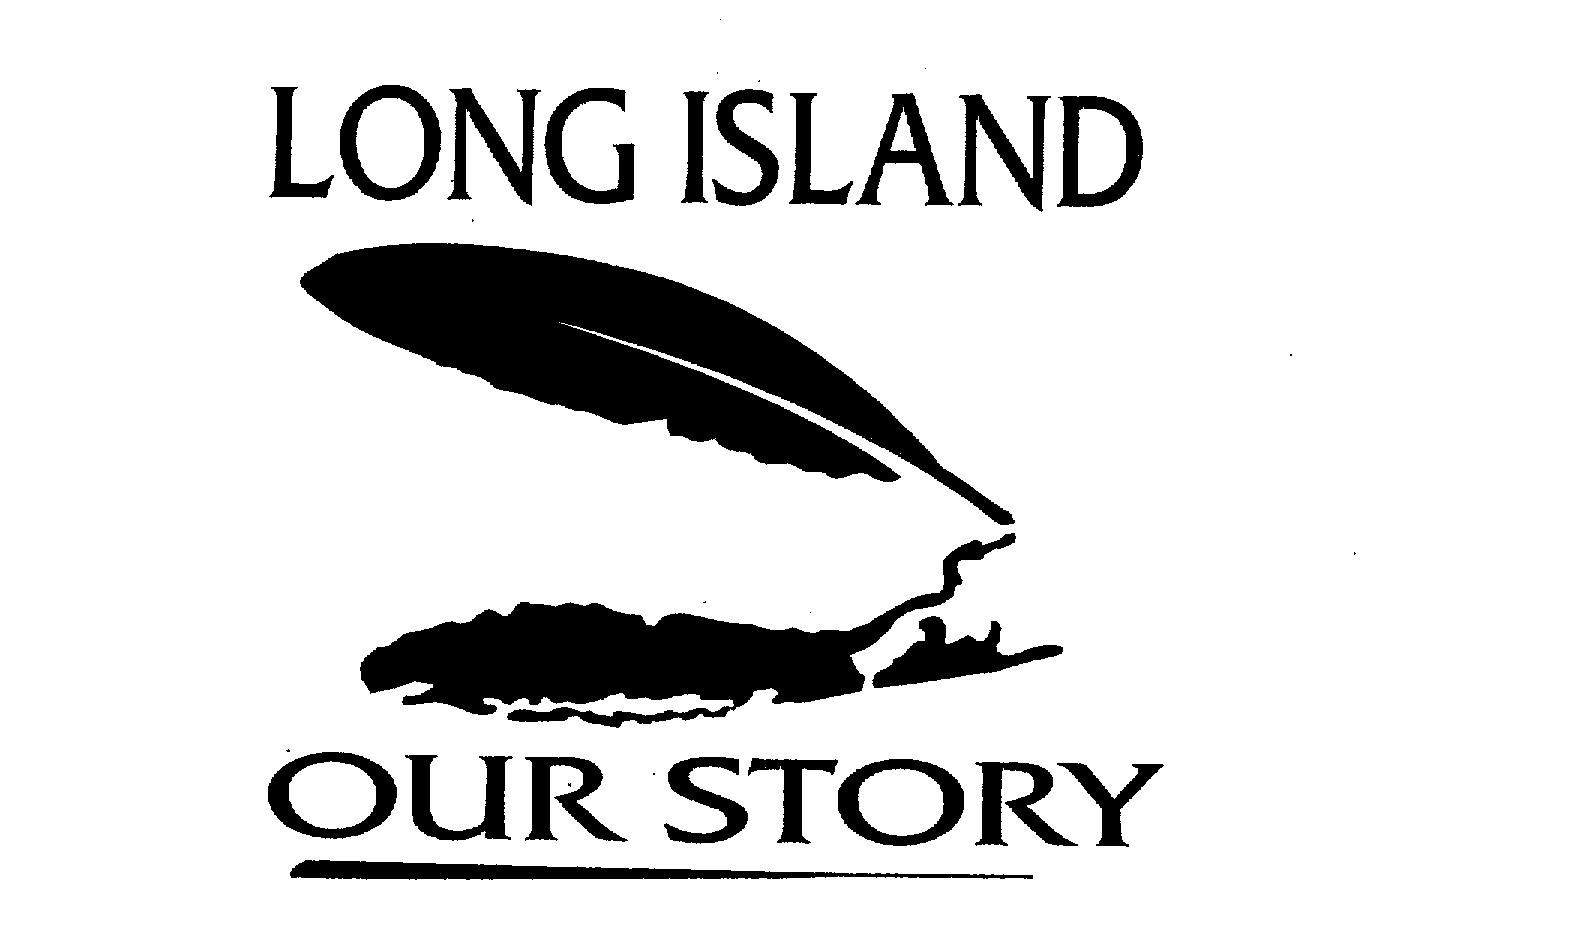  LONG ISLAND OUR STORY